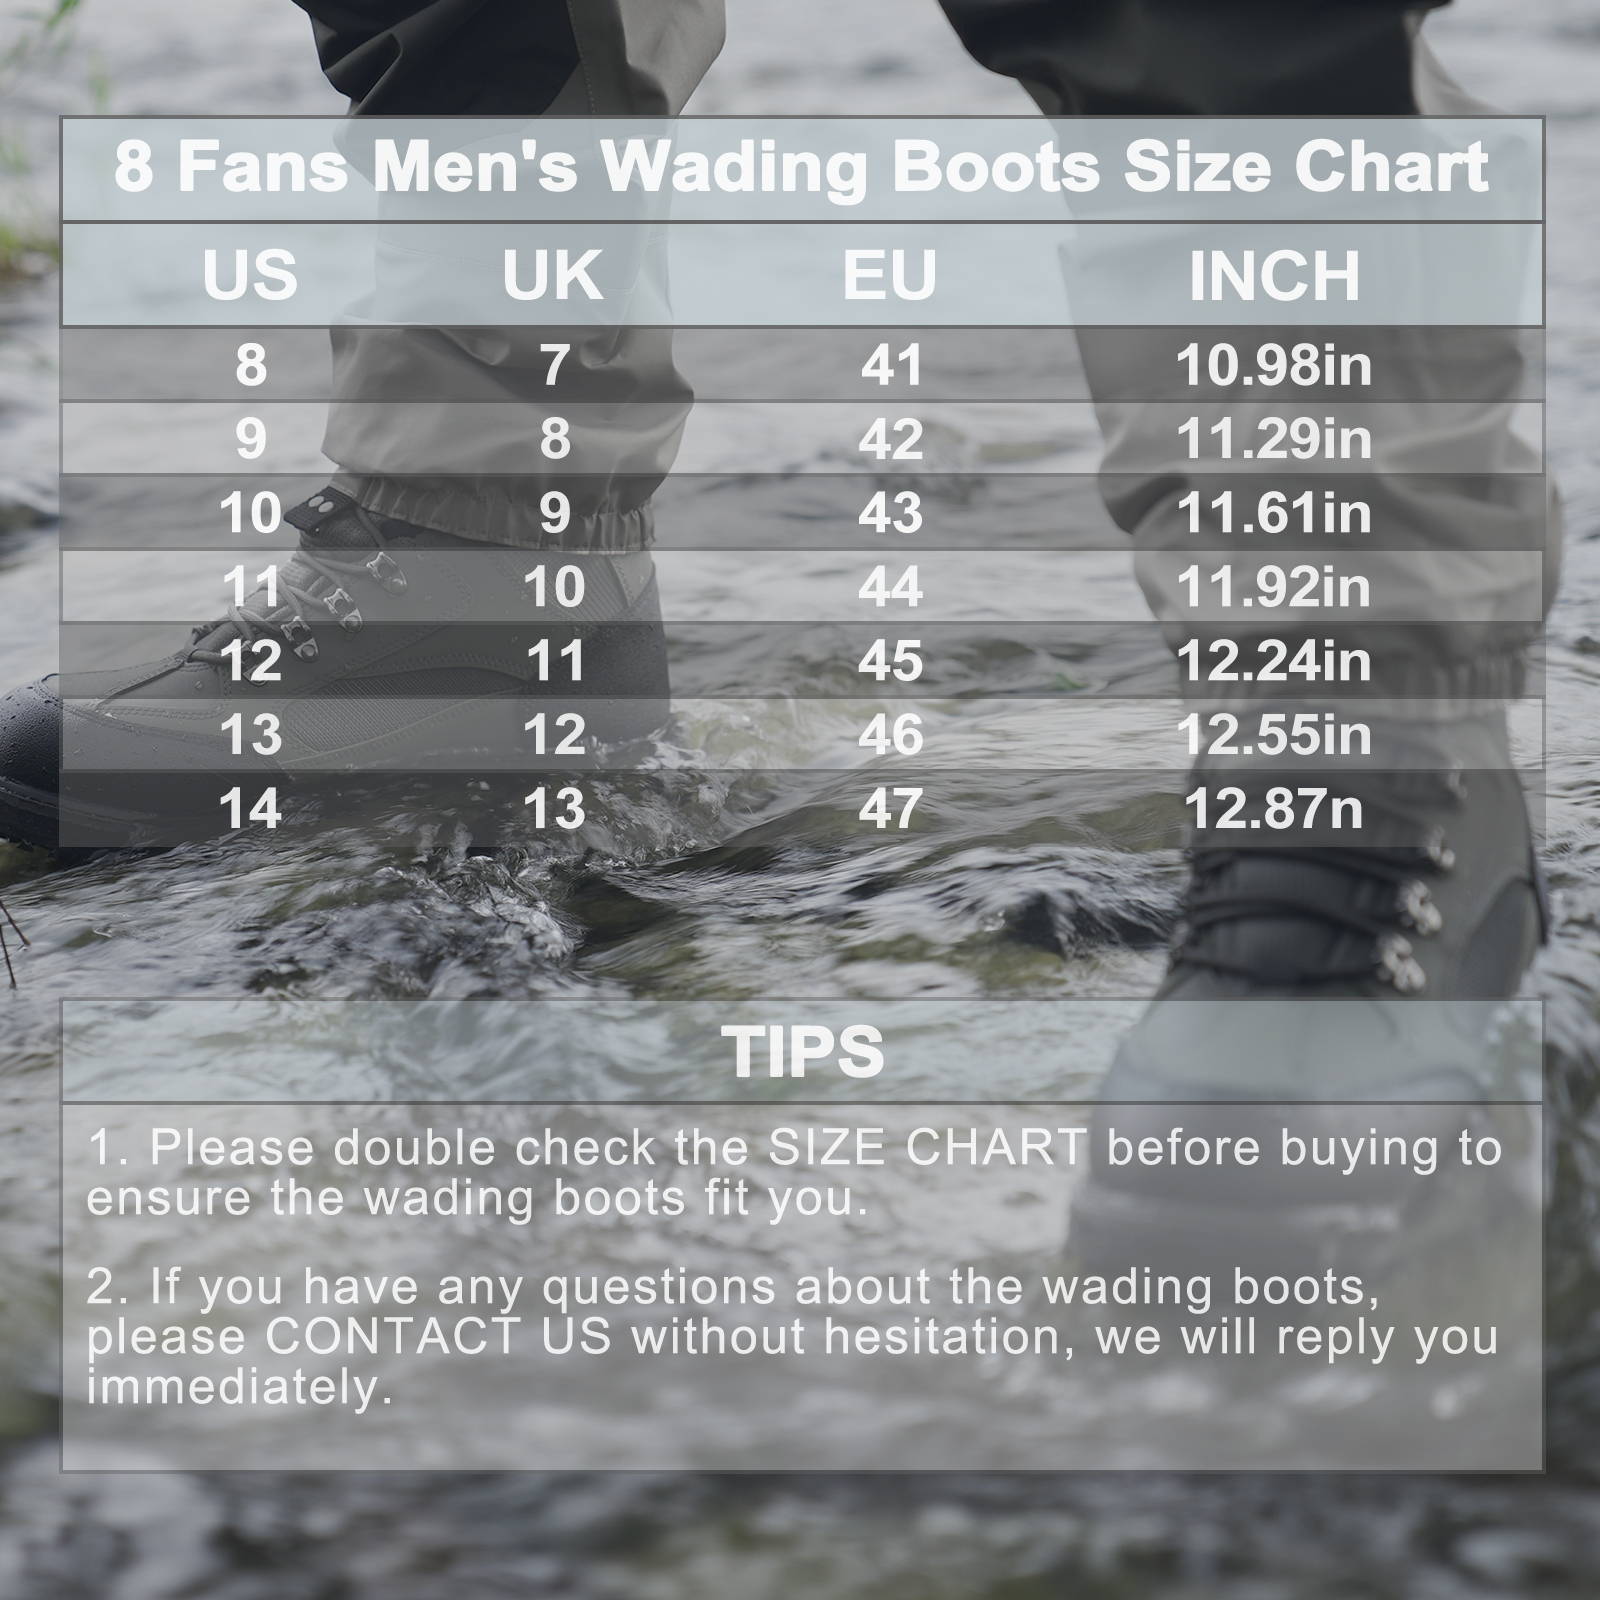 8 Fans Men's Wading Boots Non-Slip Felt Sole, Superior Comfort for Anglers,  Perfect for Fly Fishing